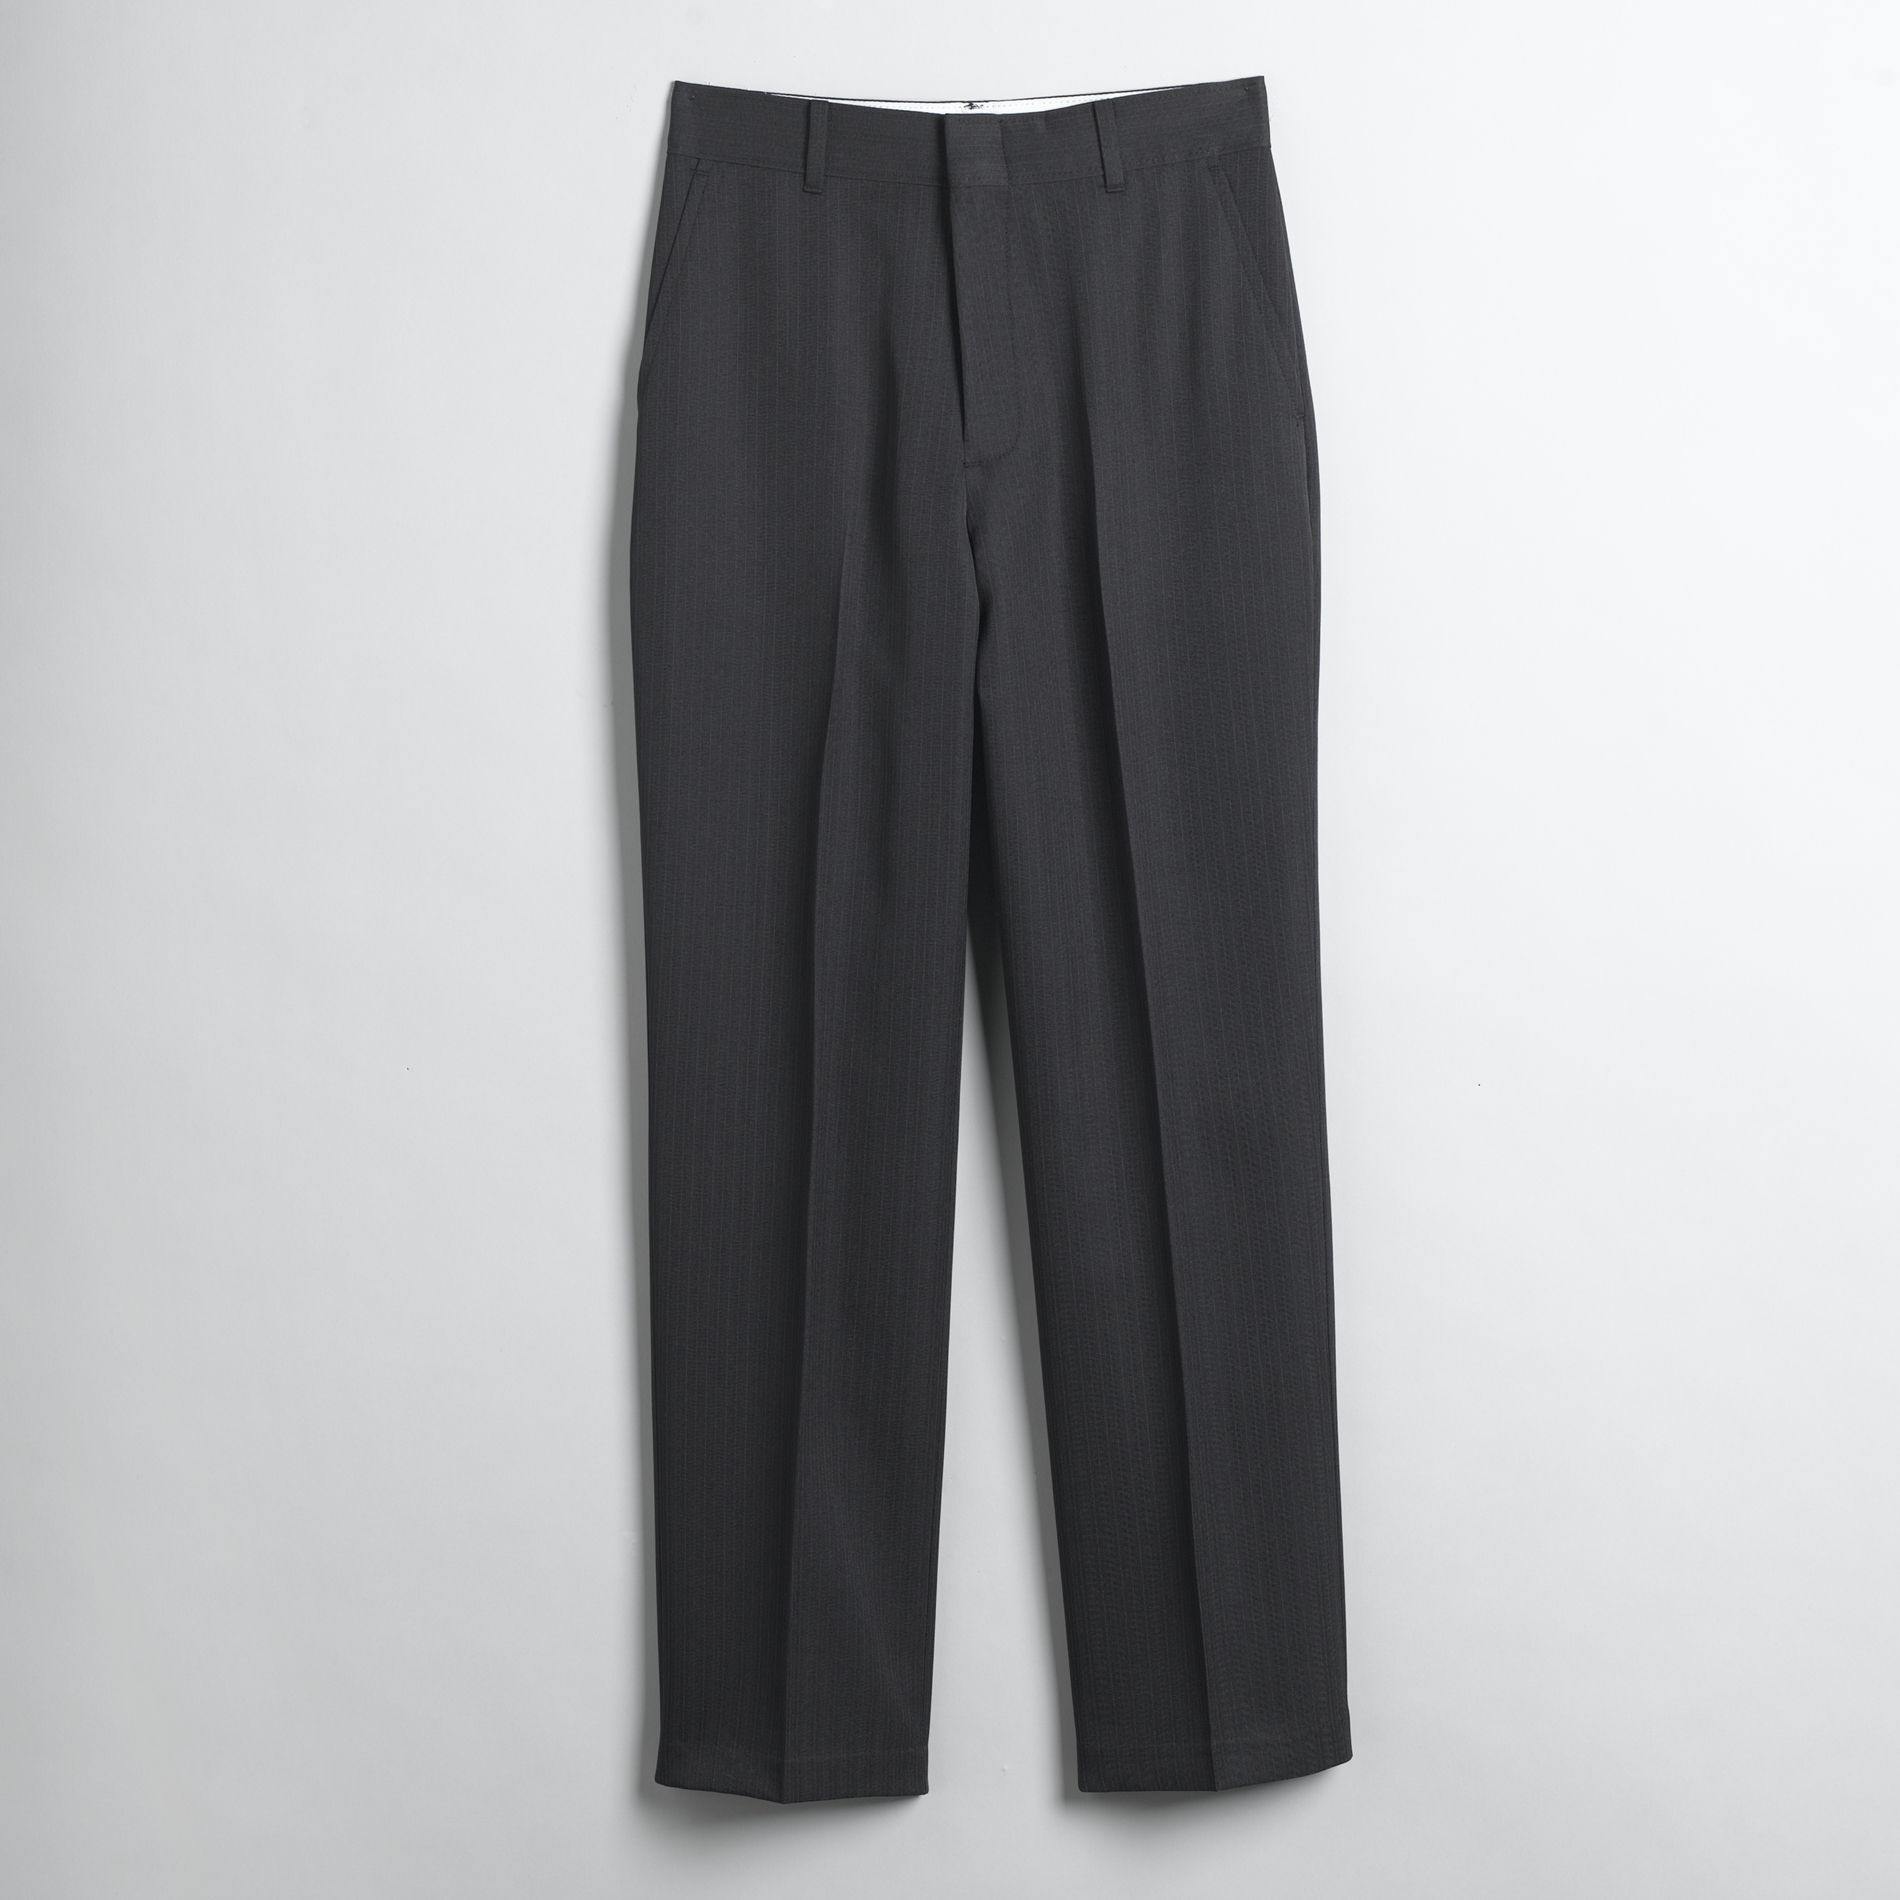 Holiday Editions Boy's Flat Front Dress Pant